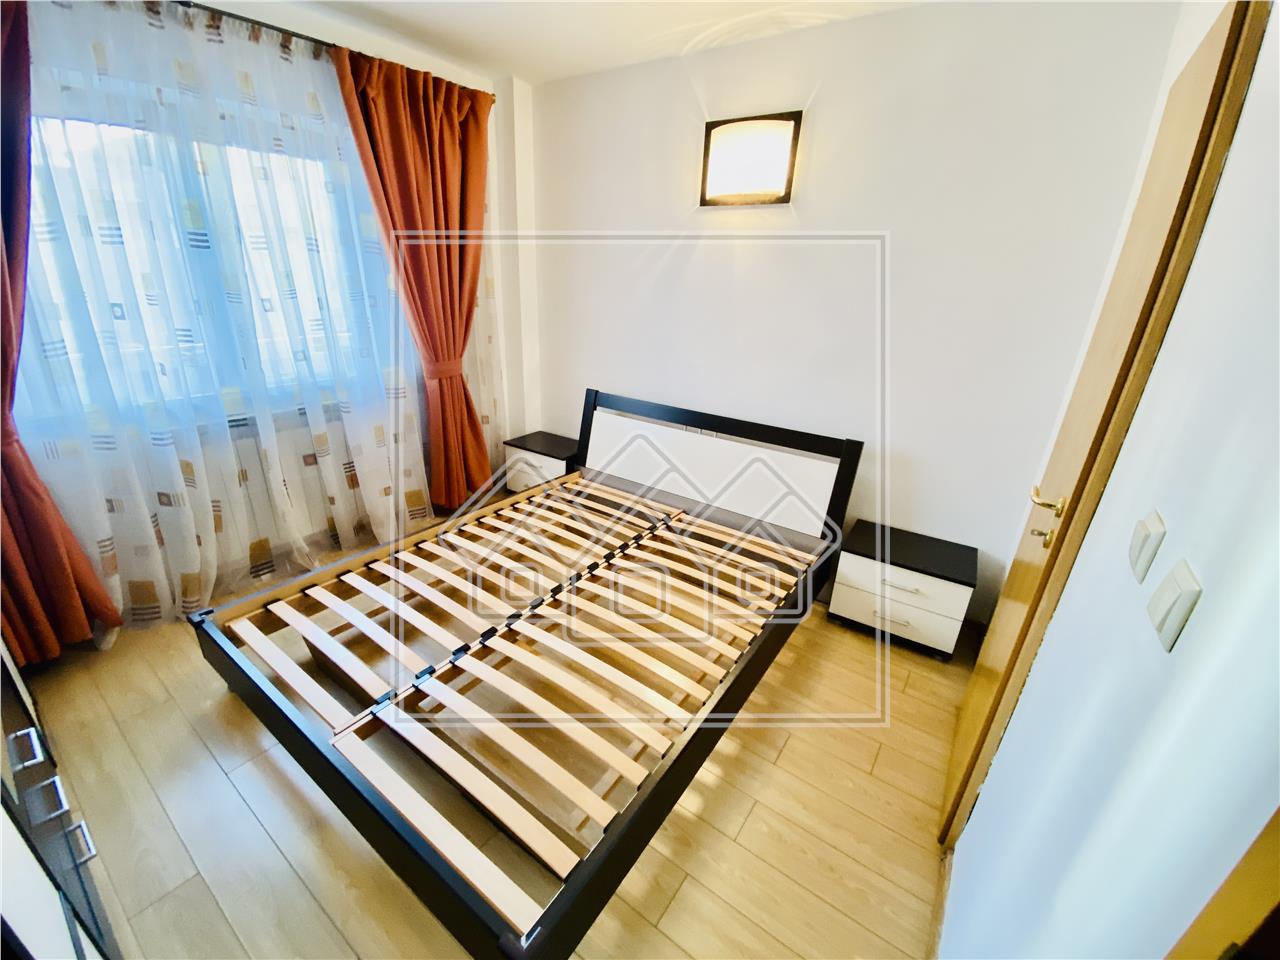 Apartment for sale in Siviu - 2 rooms and balcony - M. Viteazu area